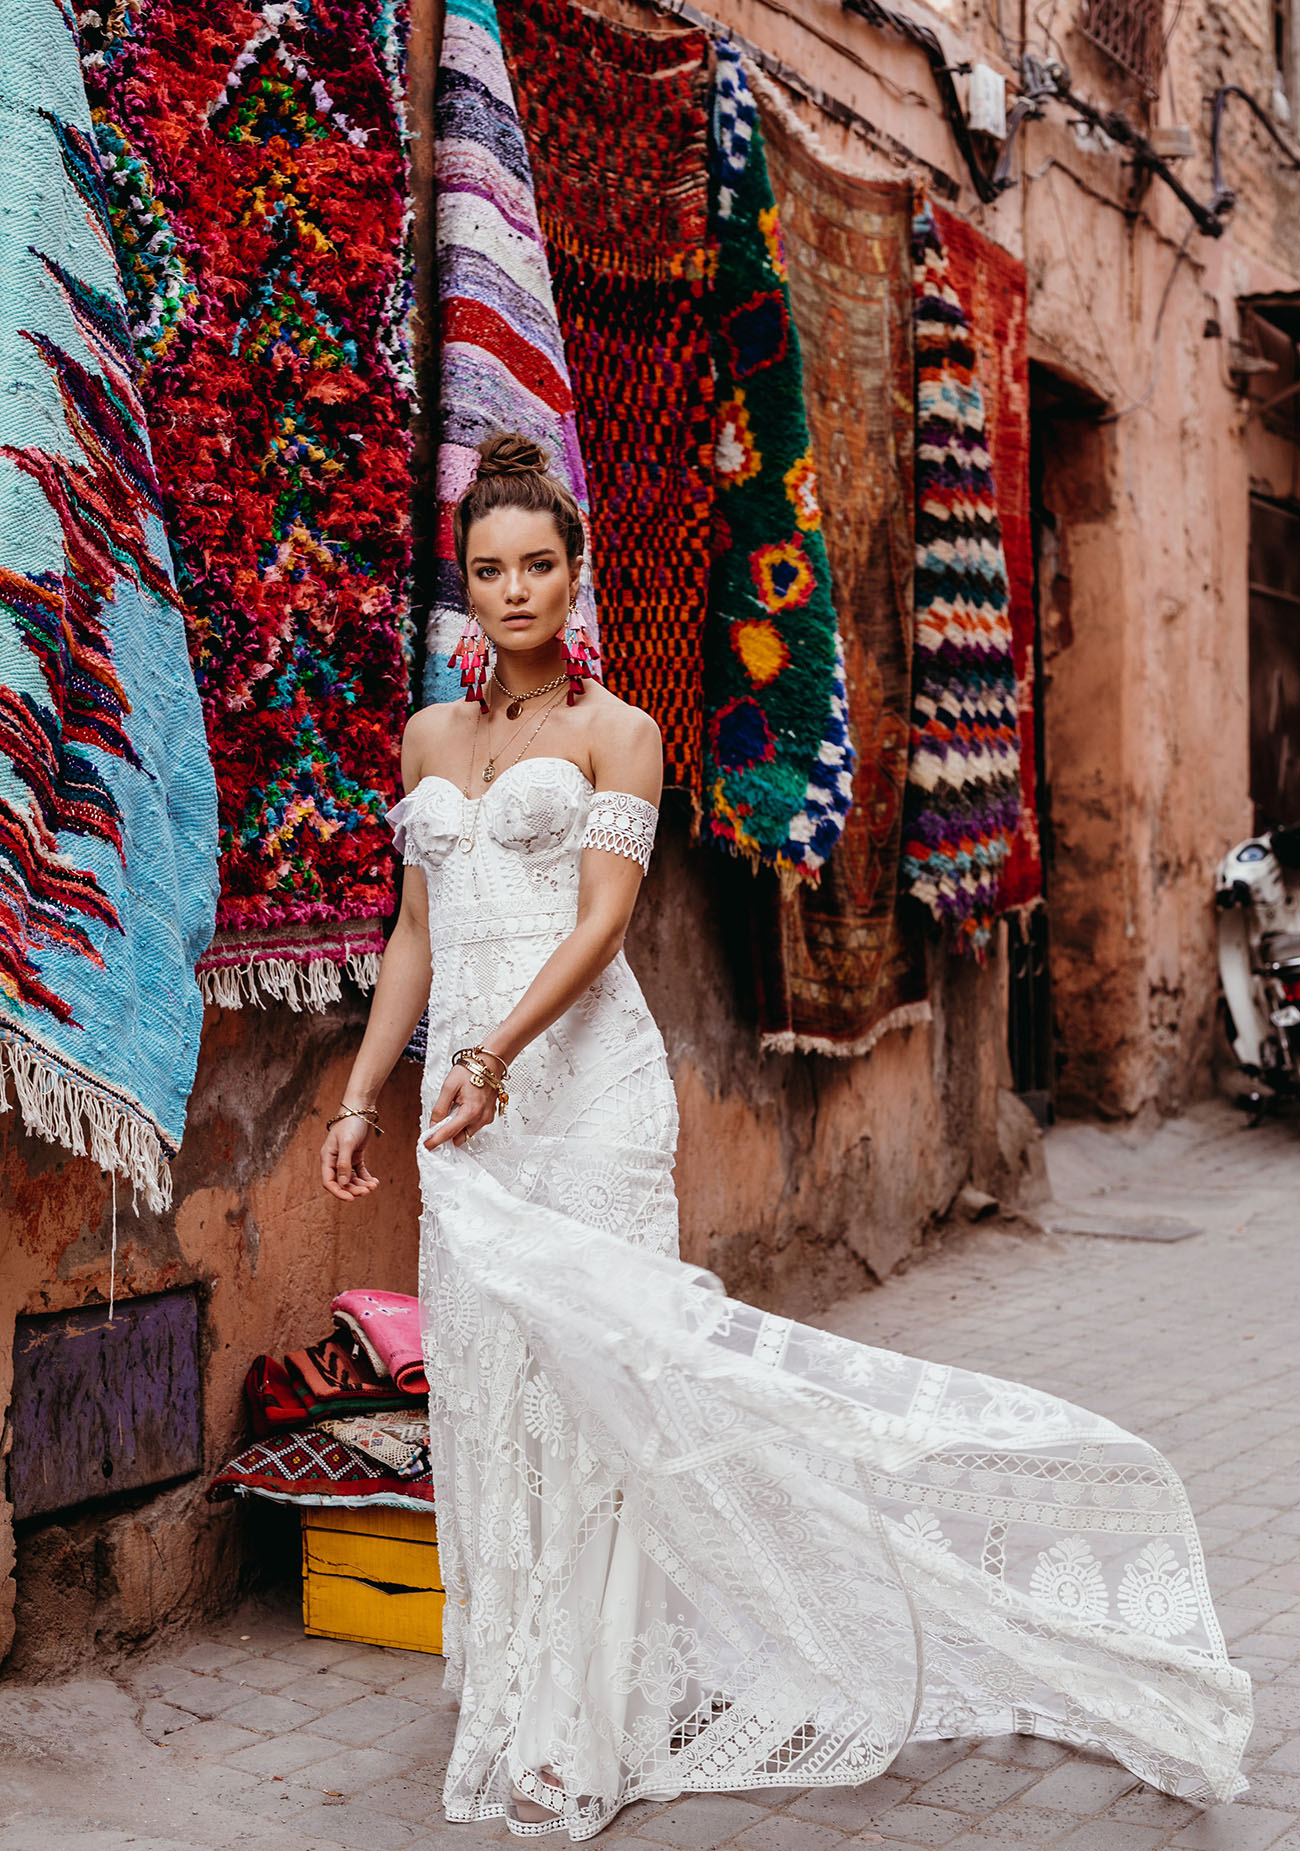 boho lace wedding gown, with a strapless neckline, a sheath silhouette, a train and arm lace bracelets